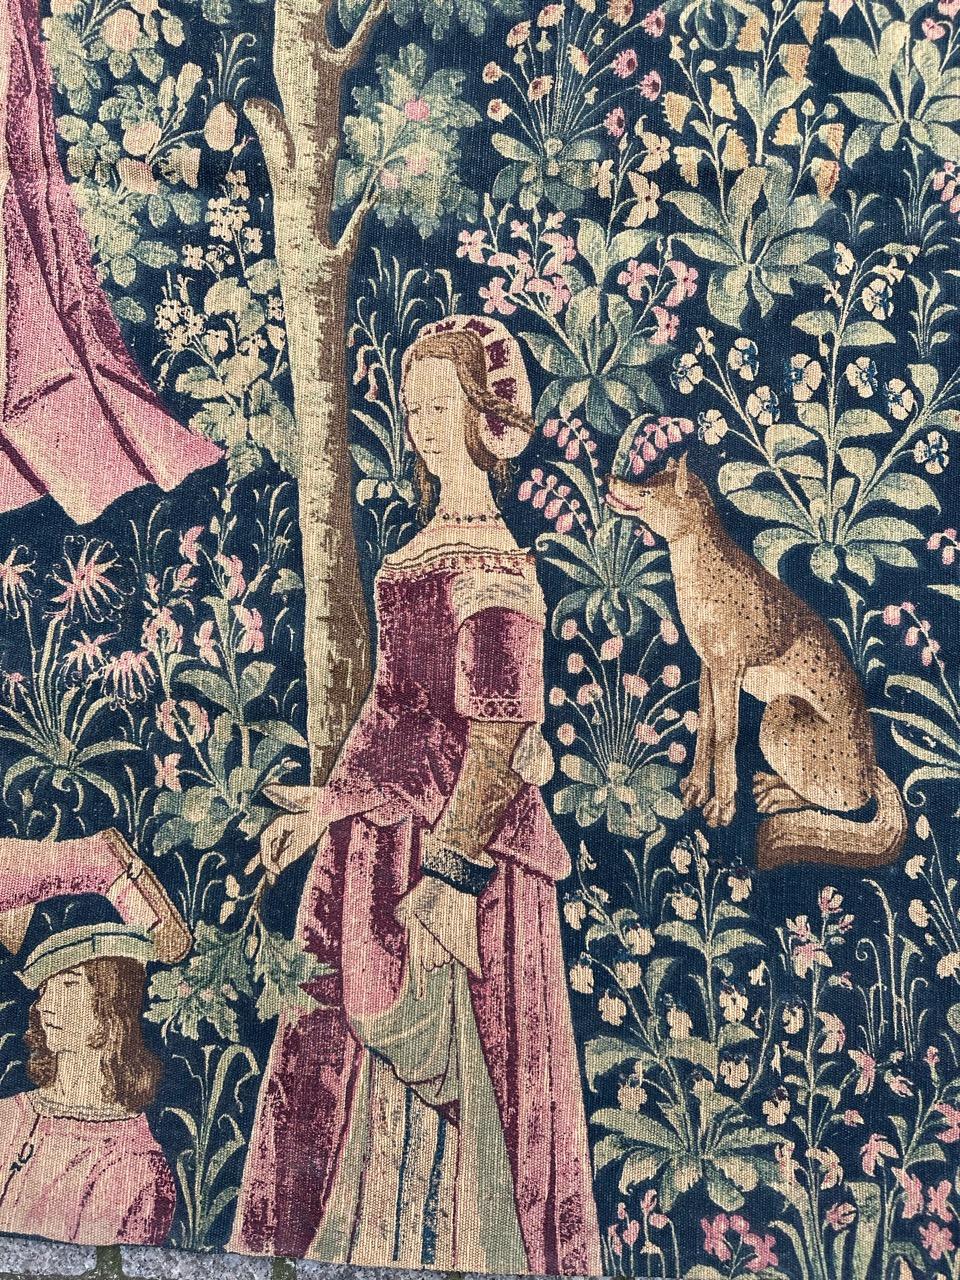 Nice vintage French hand printed tapestry with beautiful medieval design and beautiful colors. Discover a stunning mid-20th-century tapestry, meticulously hand-printed on a cotton foundation. This exquisite tapestry features the scene: 